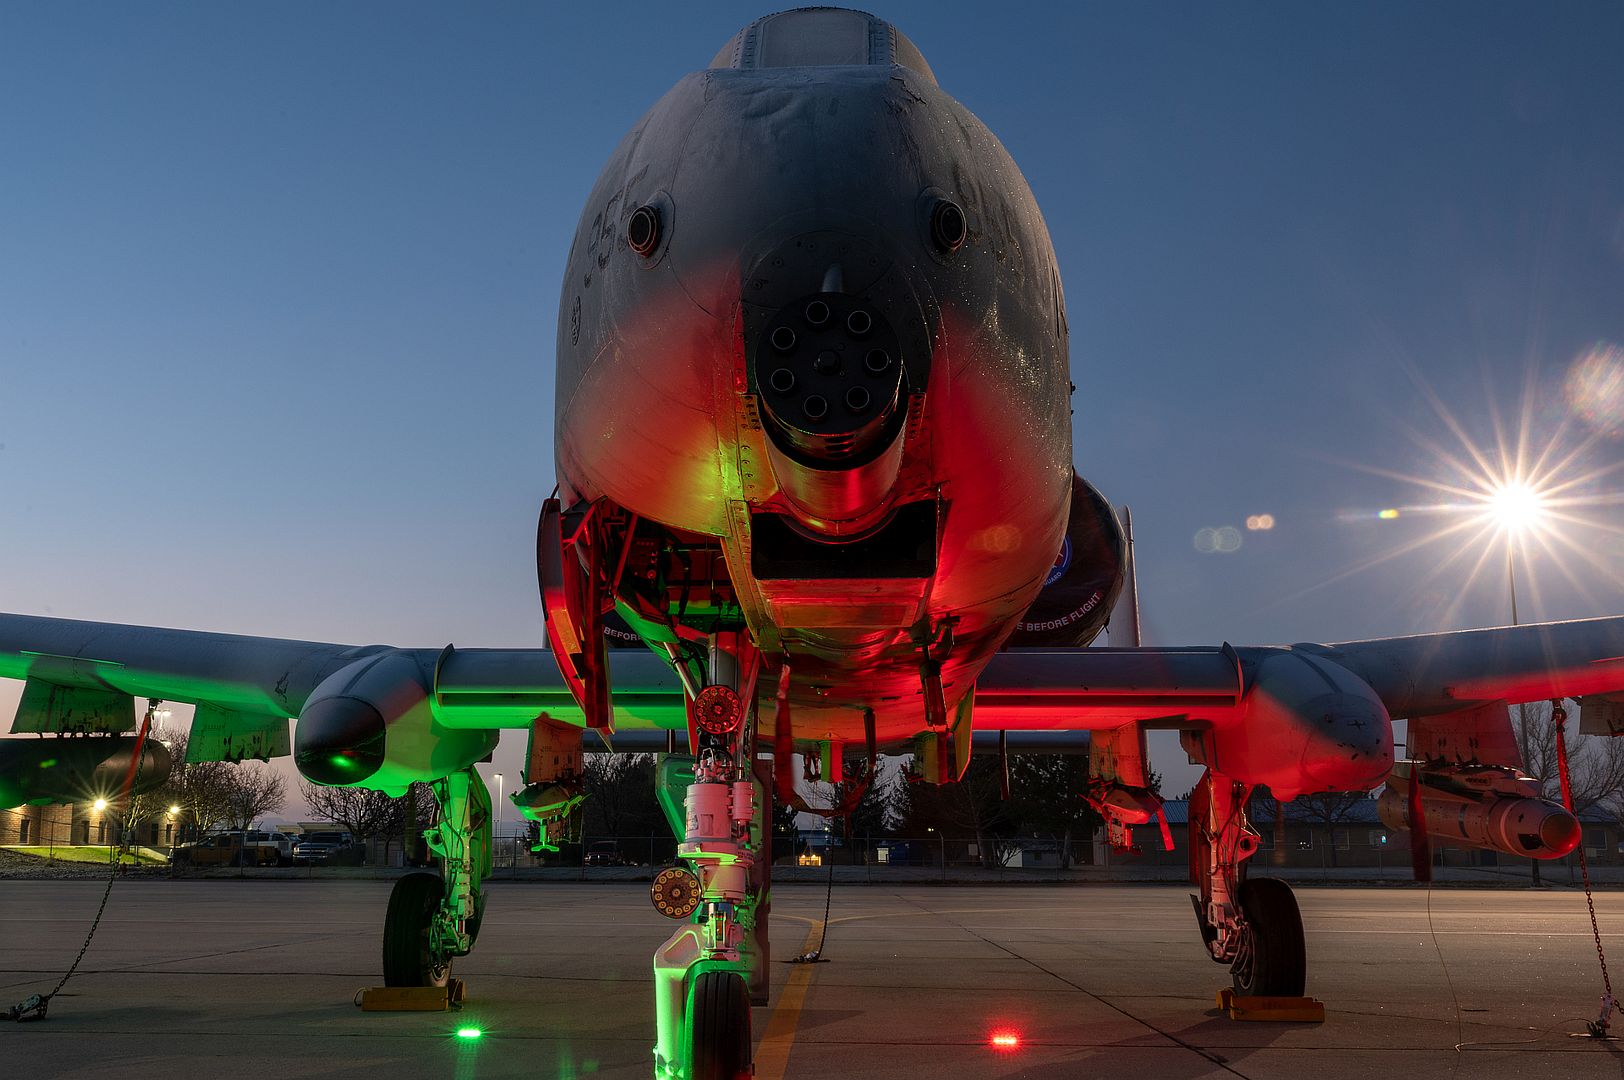 10 Thunderbolt II From The Idaho Air National Guard S 190th Fighter Squadron Poses On The Flightline With Red And Green Holiday Inspired Lights For A Photo December 21 202